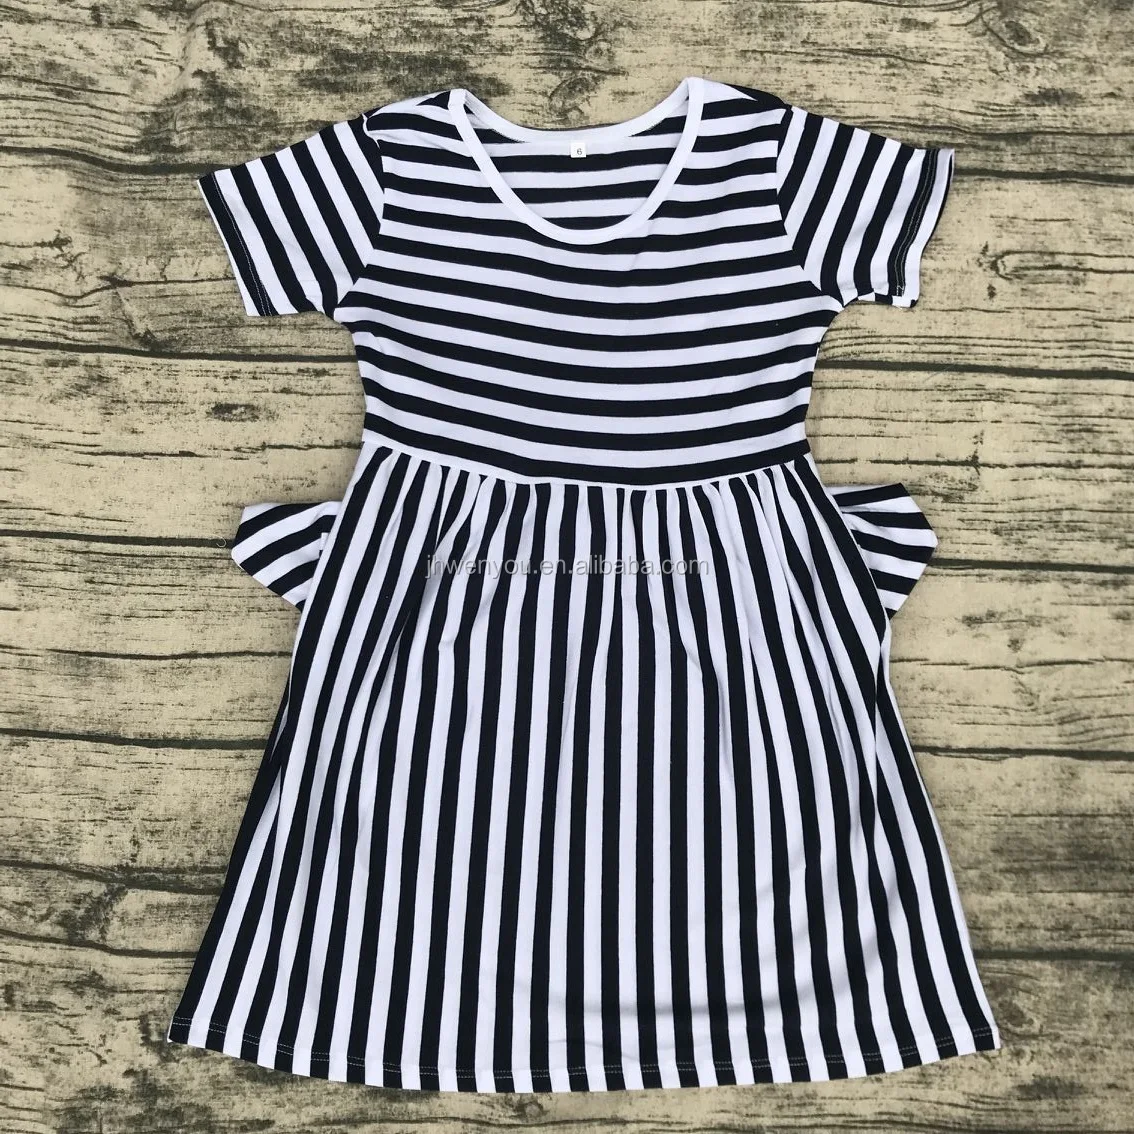 New Spring Clothing Black And White Striped Dress Little Baby Girl Kid